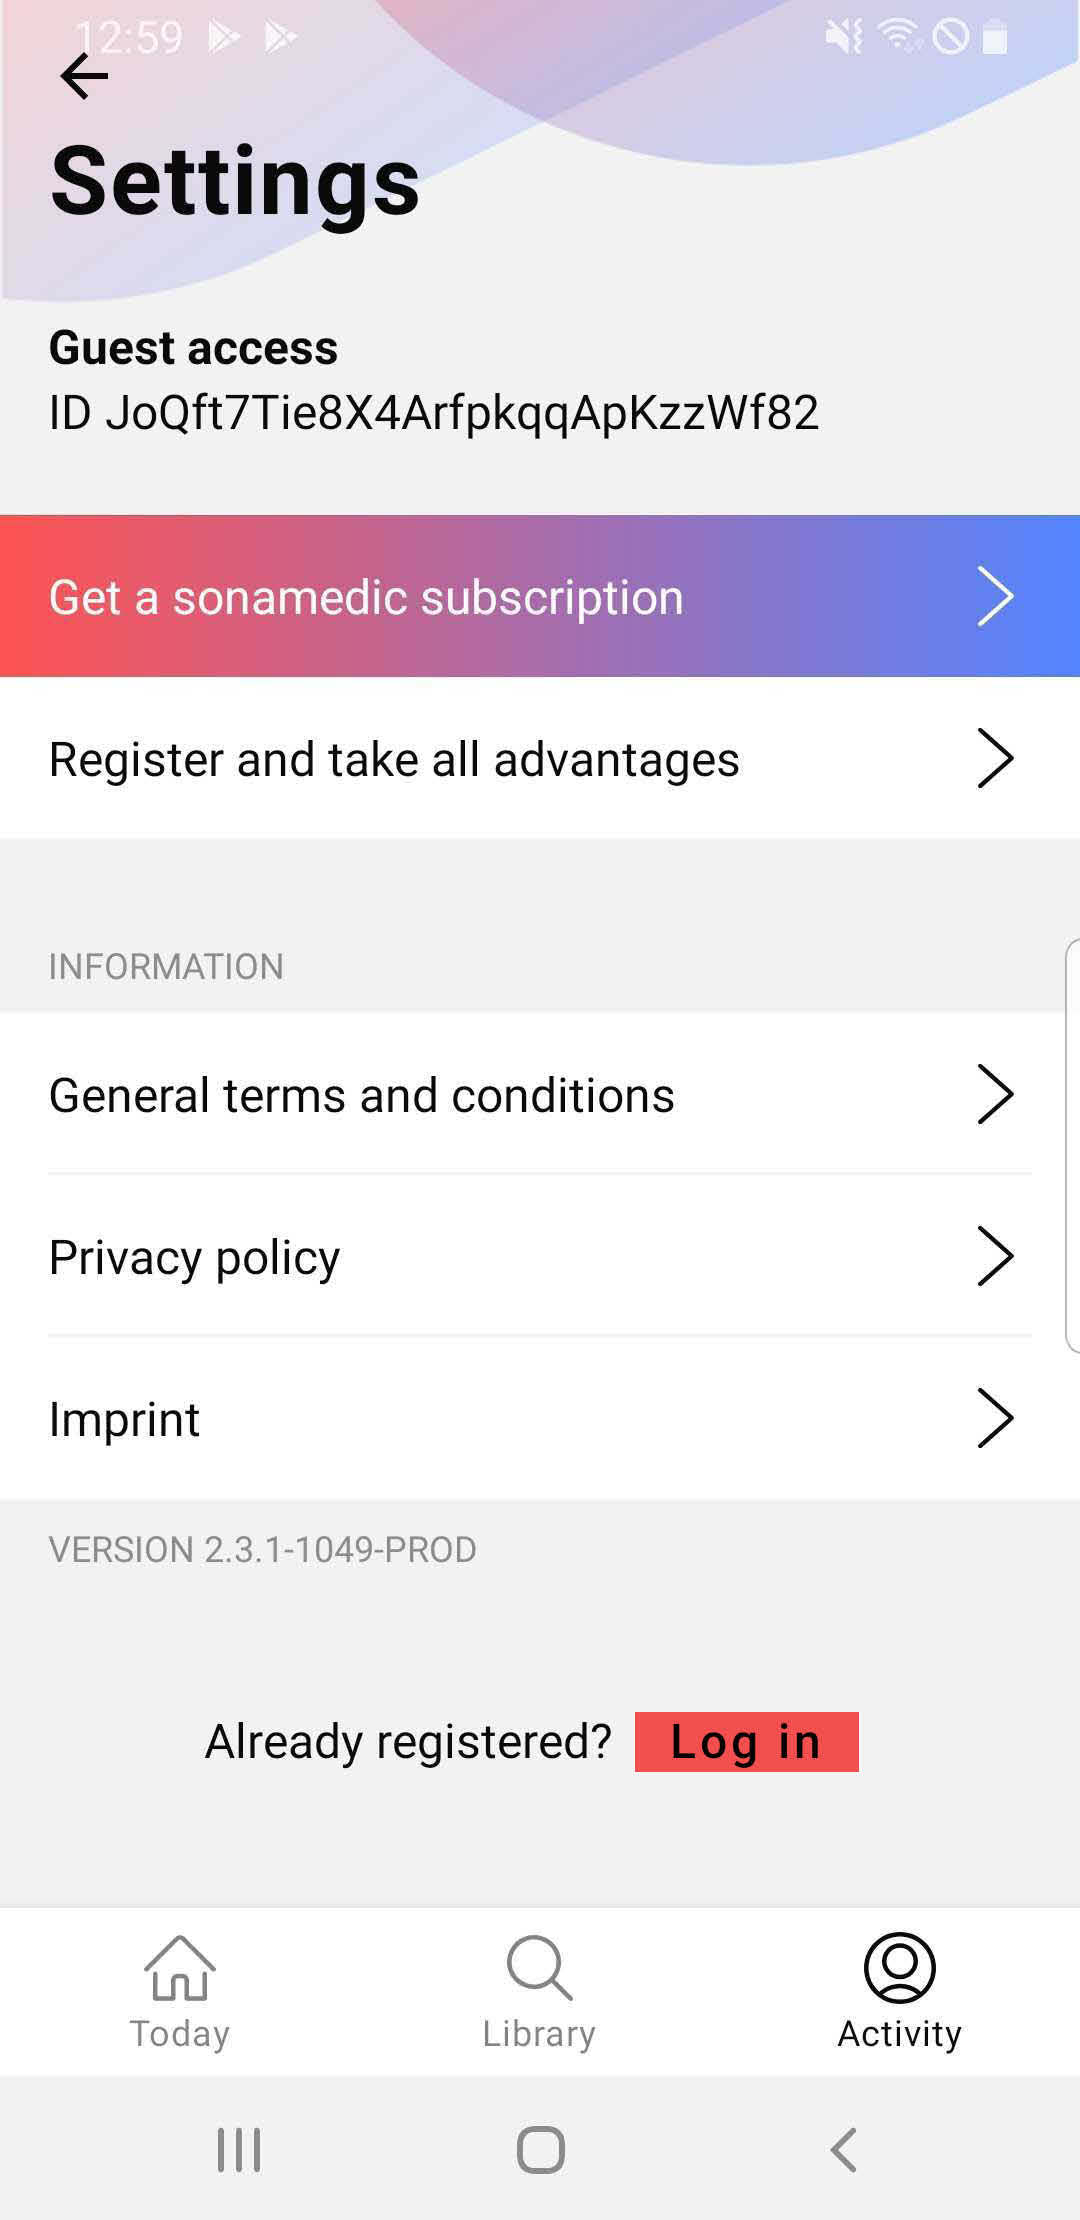 FAQ - frequently asked questions: Log in Screen sonamedic